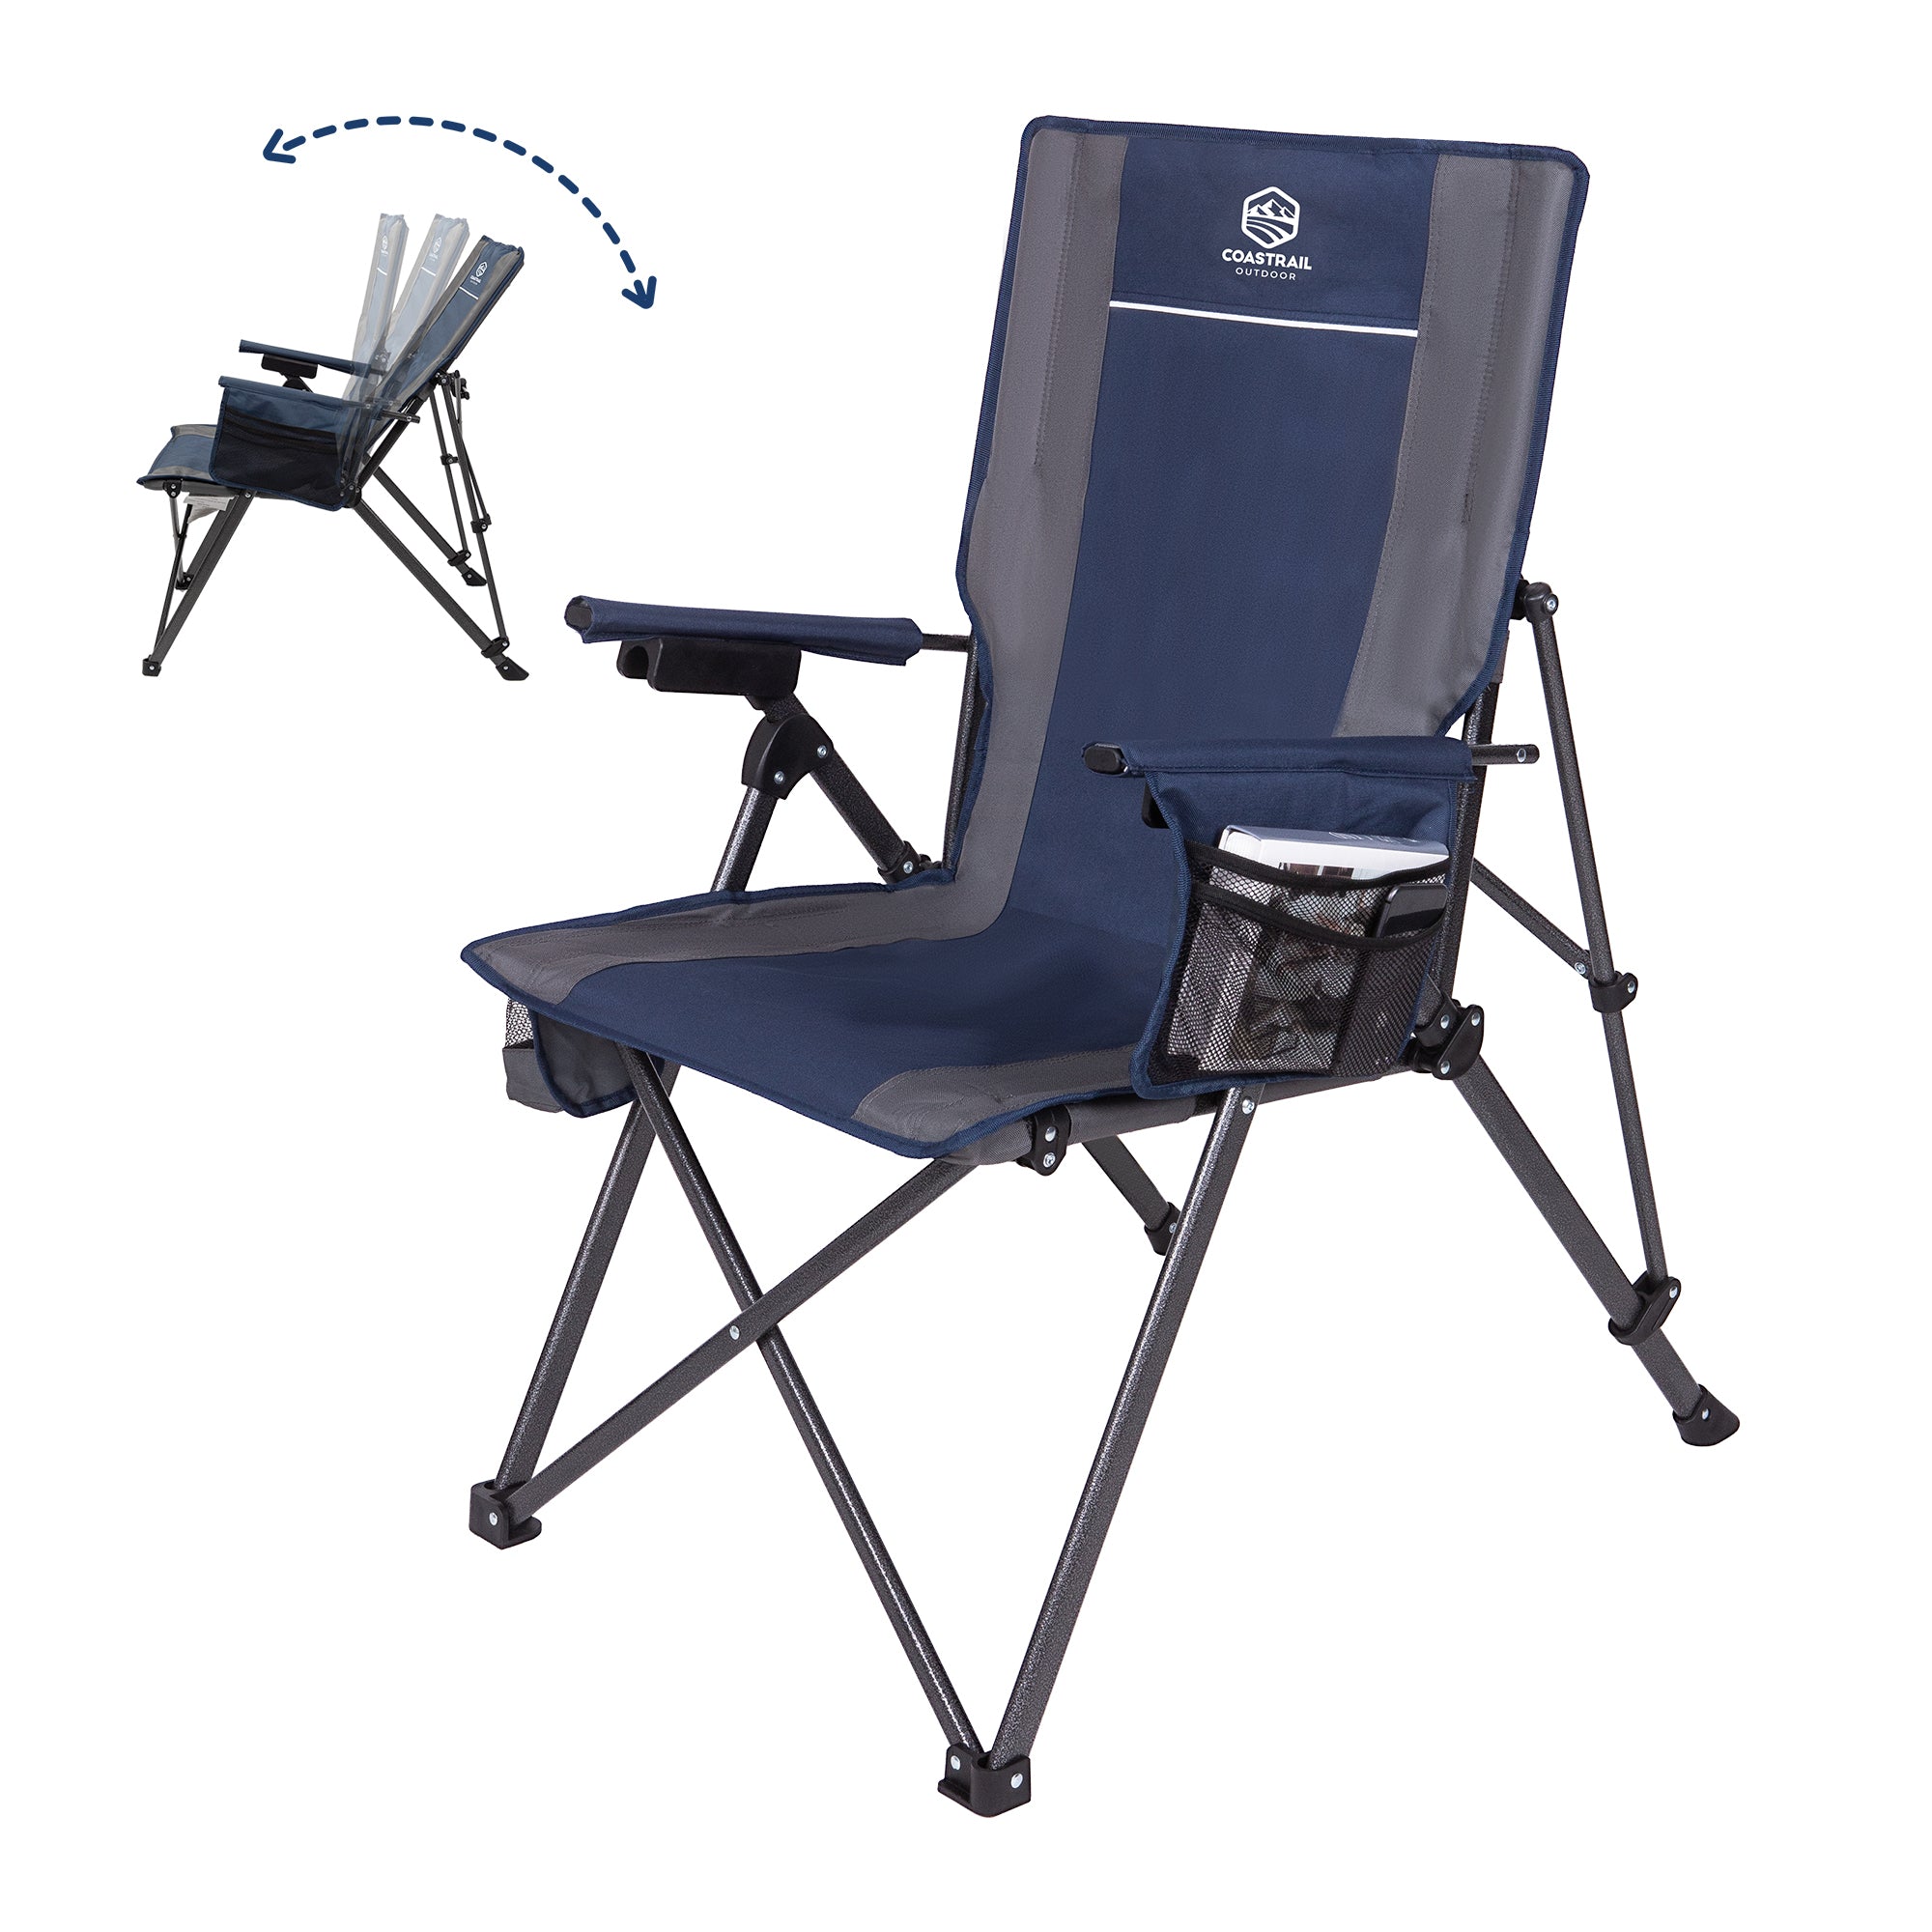 Dellonda Portable Fishing/Camping Chair, Reclining, Adjustable Height, Water Resistant, Foldable